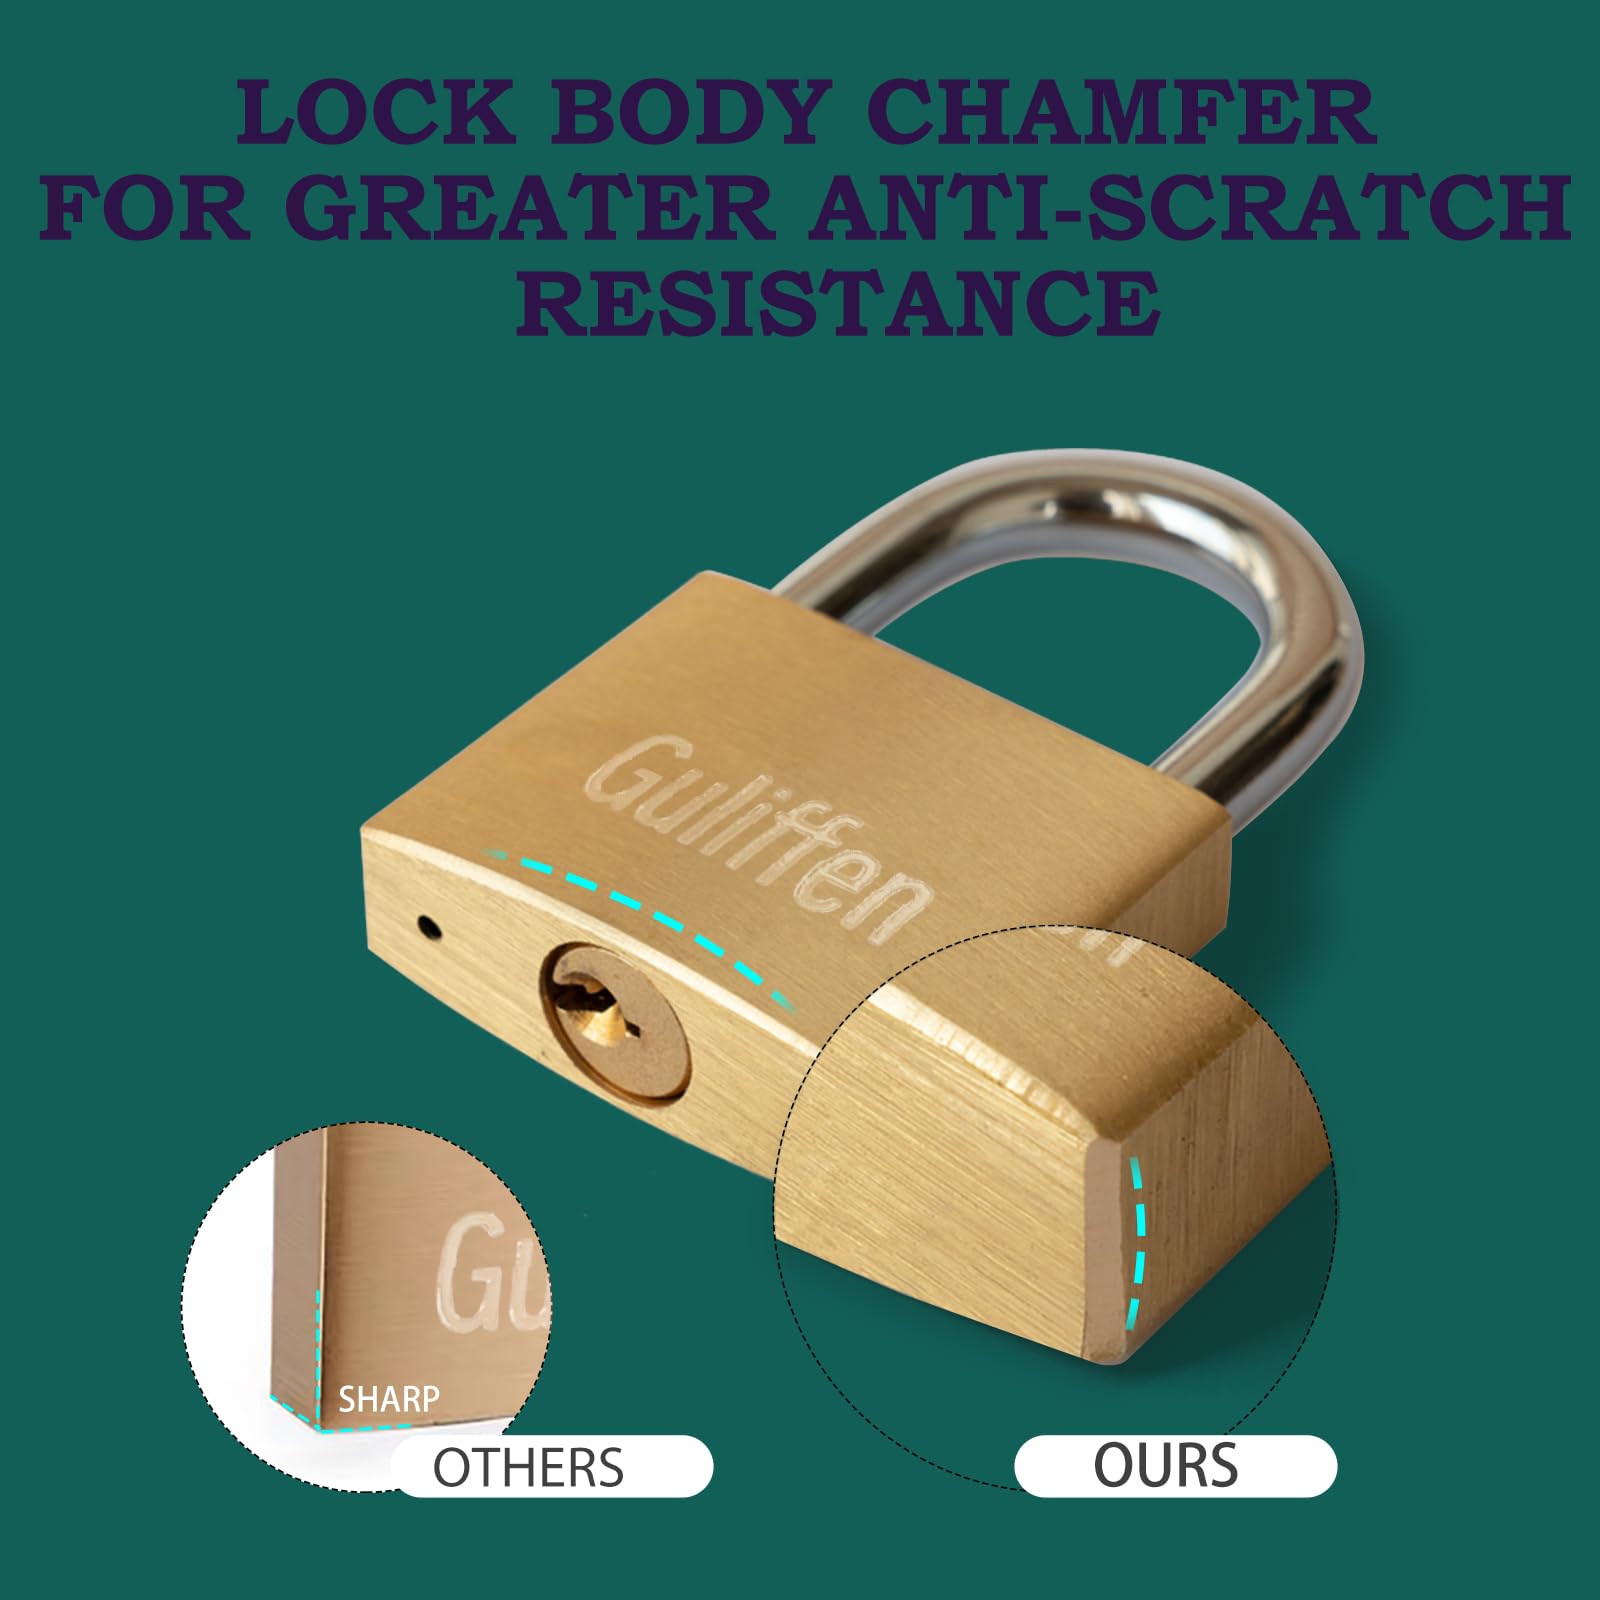 Guliffen Solid Brass Padlock with Key with 1-9/16 in. (40 mm) Wide Lock Body,Keyed Padlock for Sheds, Storage Unit School Gym Locker, Fence, Toolbox, Hasp Storage